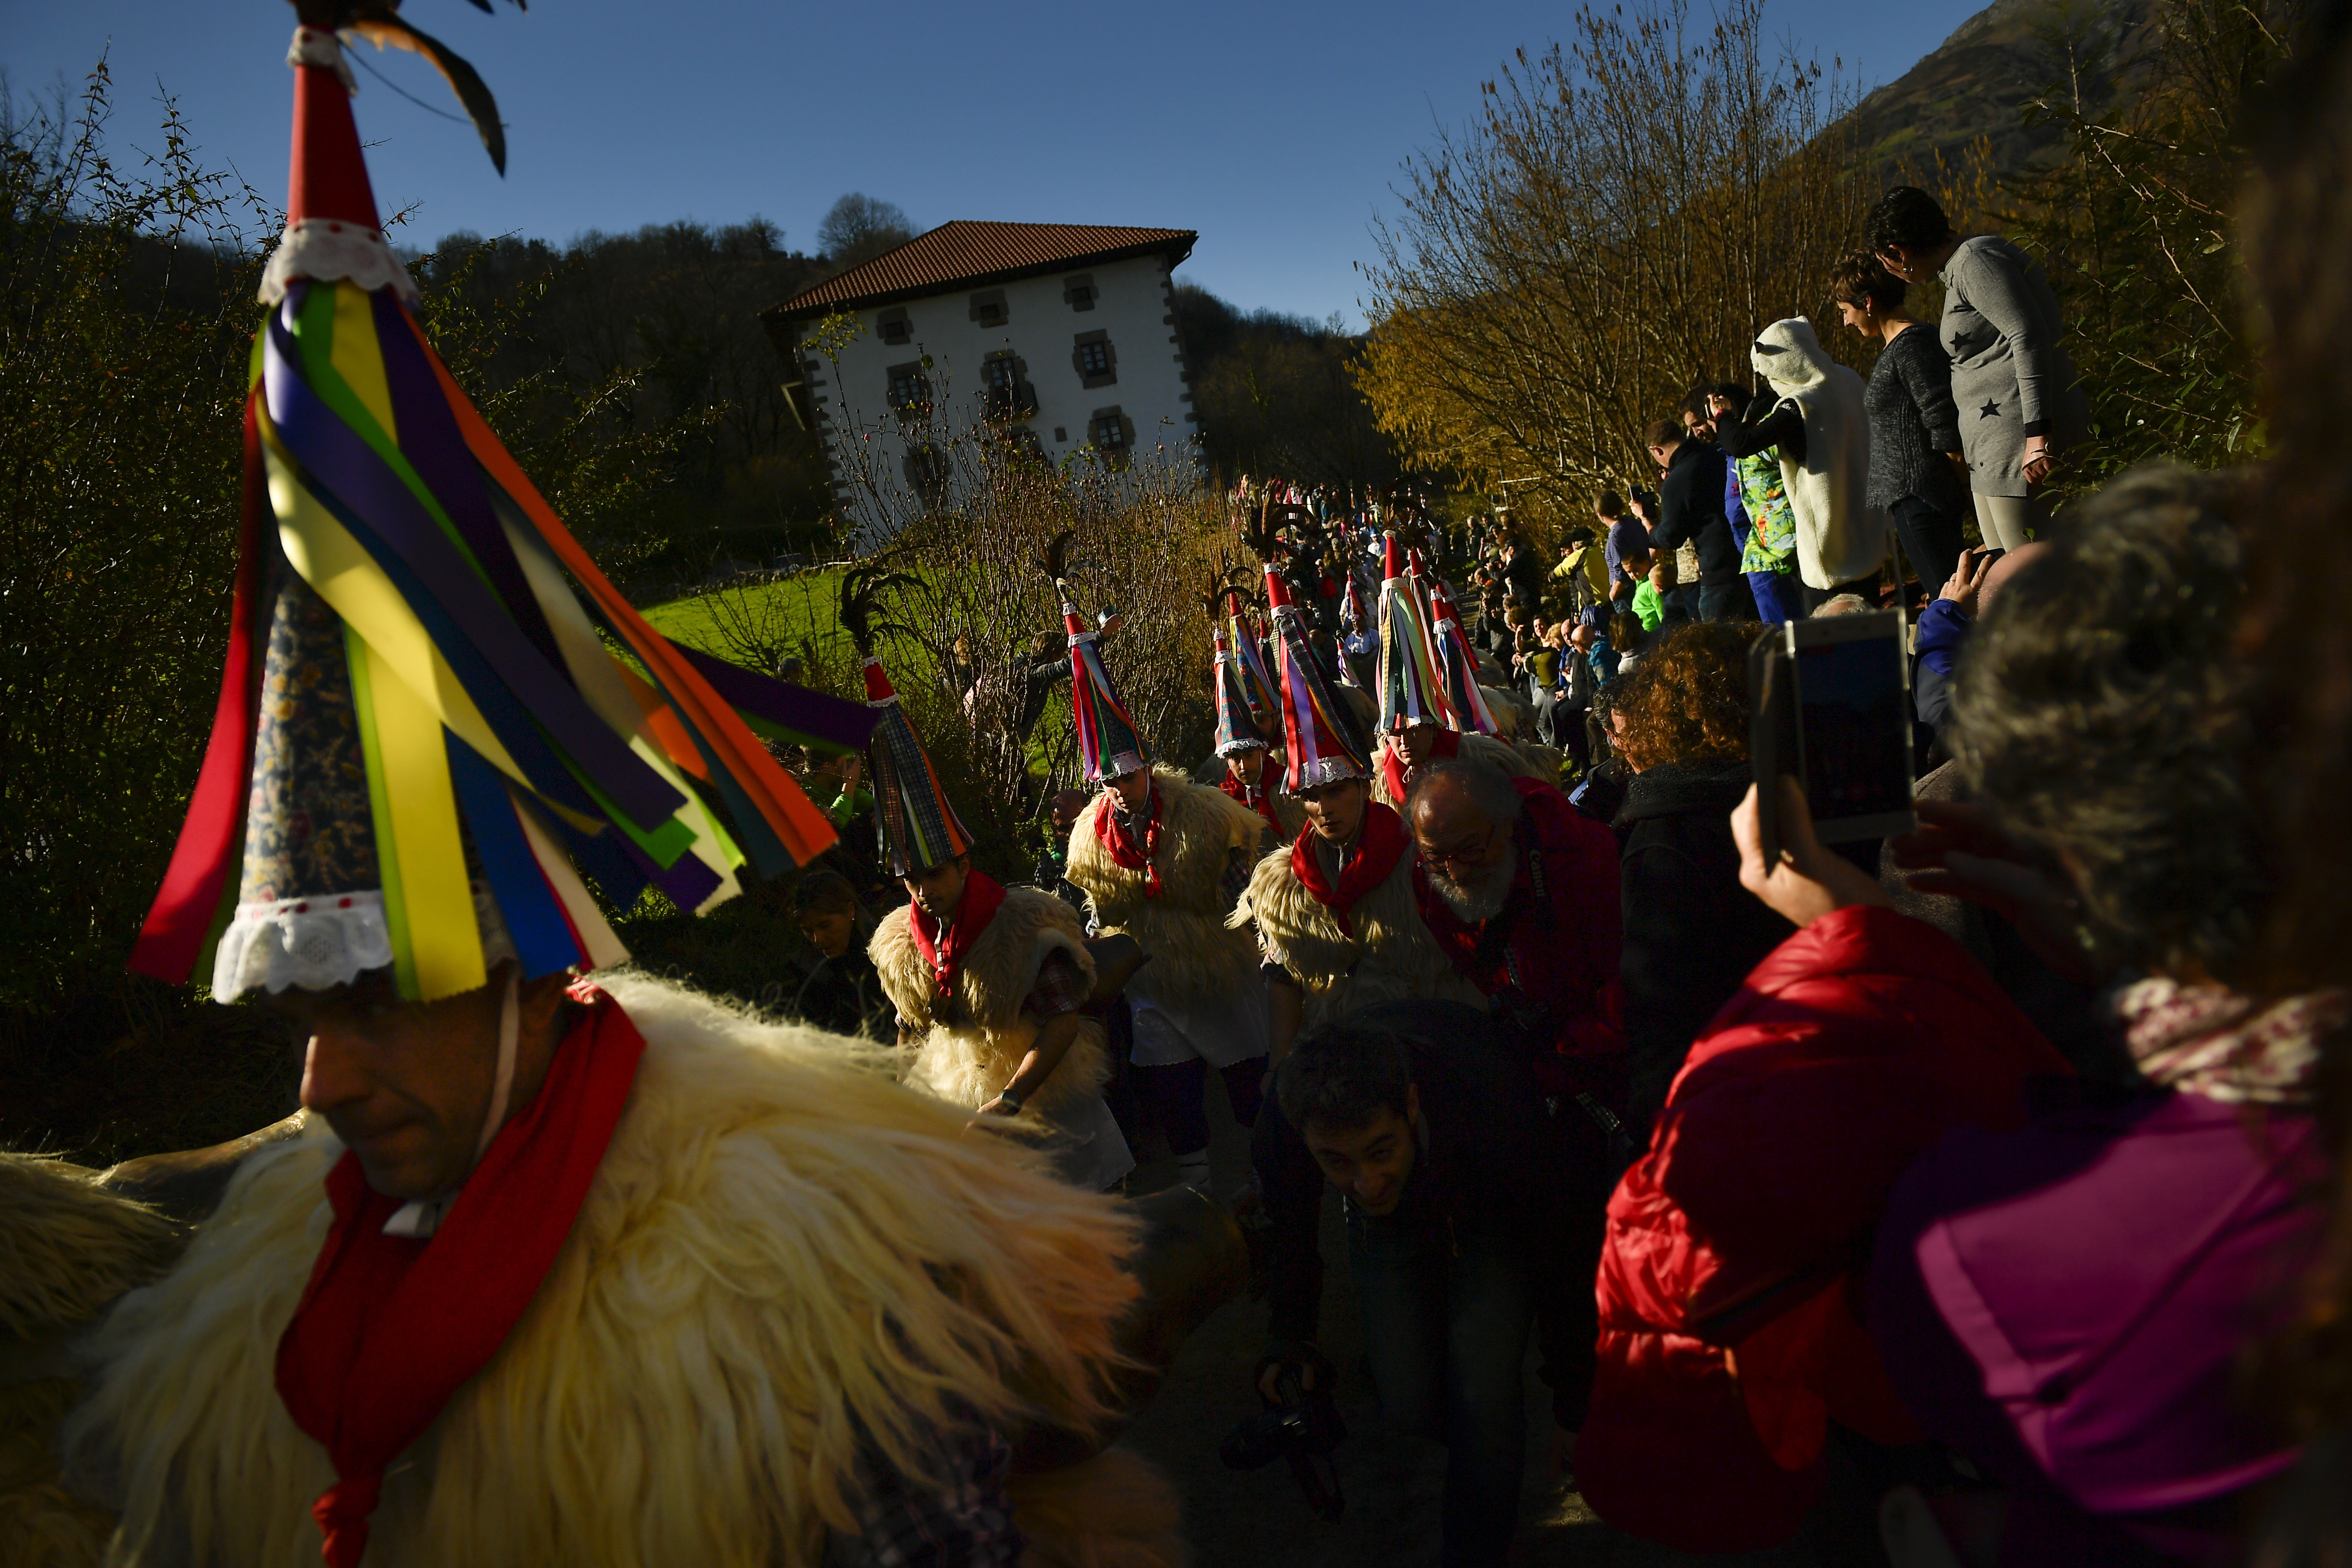 A group of Joaldunaks called Zanpantzar, take part in the Carnival between the Pyrenees villages of Ituren and Zubieta, northern Spain, Monday, Jan. 29, 2018. In one of the most ancient carnivals in Europe, dating from before the Roman empire, companies of Joaldunak (cowbells) made up of residents of two towns, Ituren and Zubieta, parade the streets costumed in sandals, lace petticoats, sheepskins around the waist and shoulders, coloured neckerchiefs, conical caps with ribbons and a hyssop of horsehair in their right hands and cowbells hung across their lower back. (AP Photo/Alvaro Barrientos)